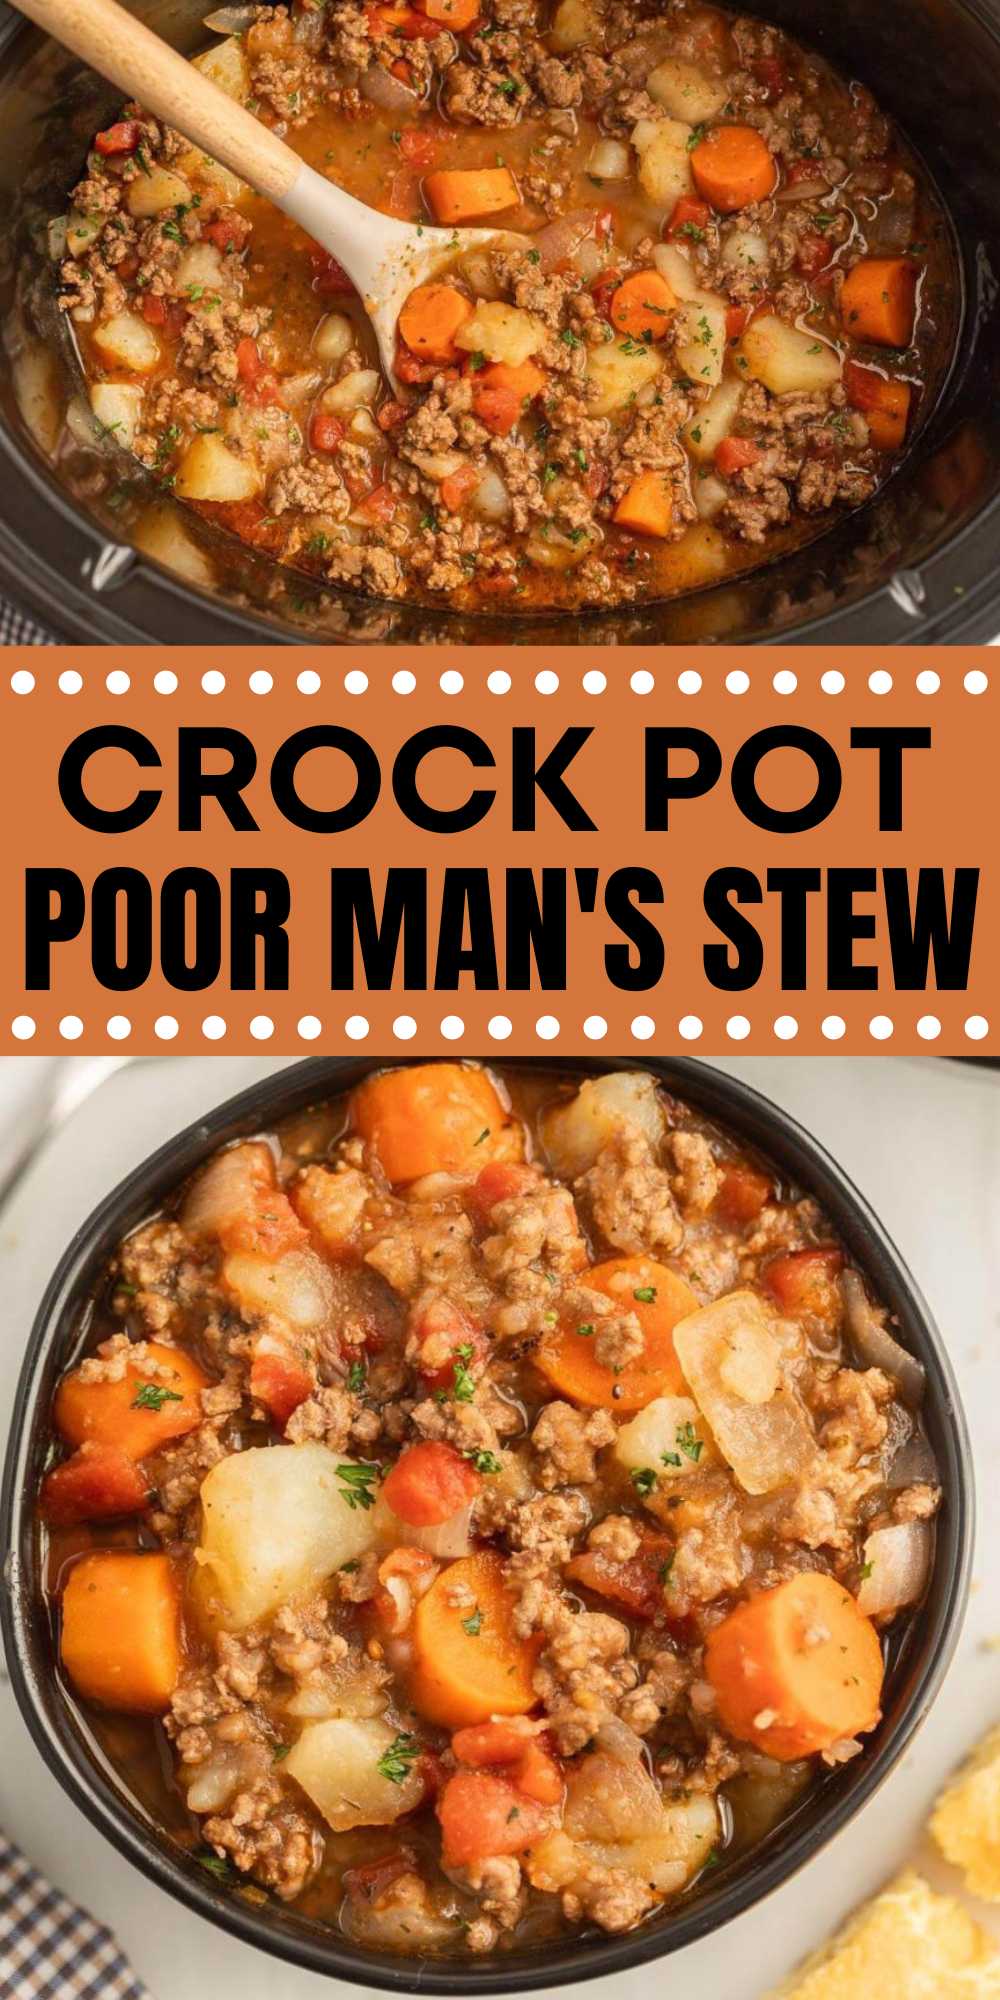 Crock Pot Poor Man's Stew is made with ground beef and other simple ingredients to make this delicious and budget friendly stew recipe. Loaded with ground beef and delicious vegetables. This stew is easy to make and the perfect weeknight meal. #eatingonadime #poormansstew #crockpotgroundbeefstew